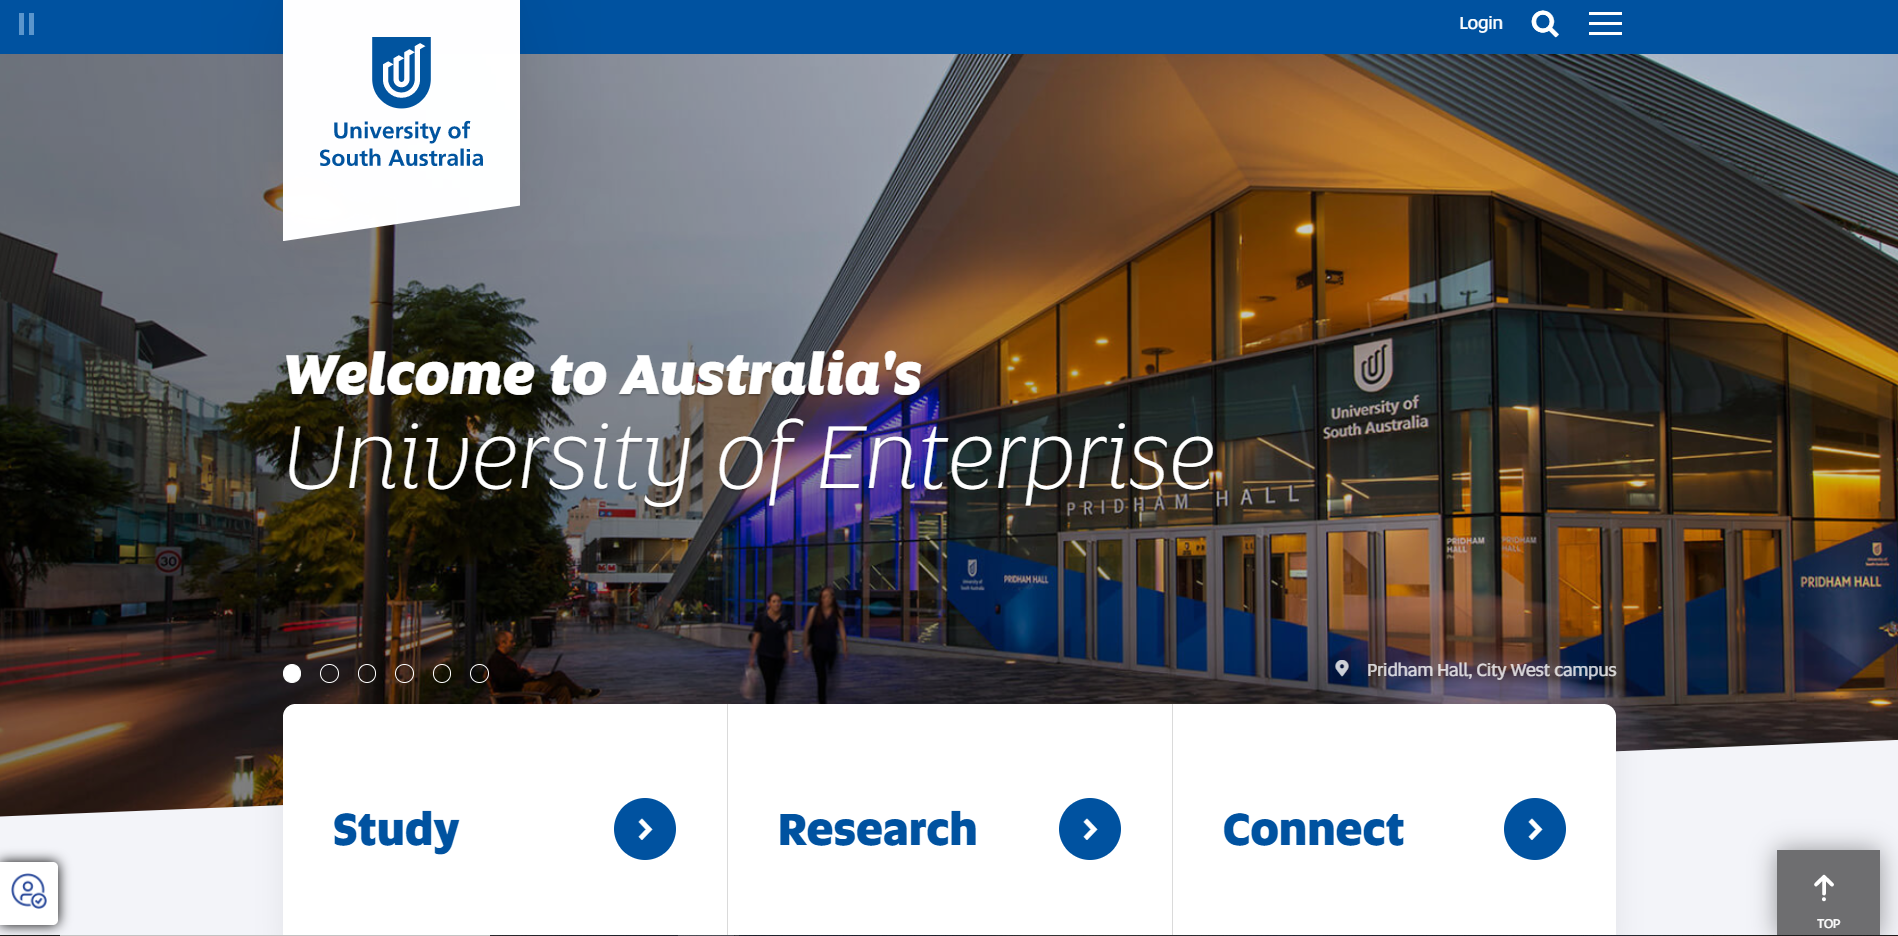 UniSA website, with menu and image of building